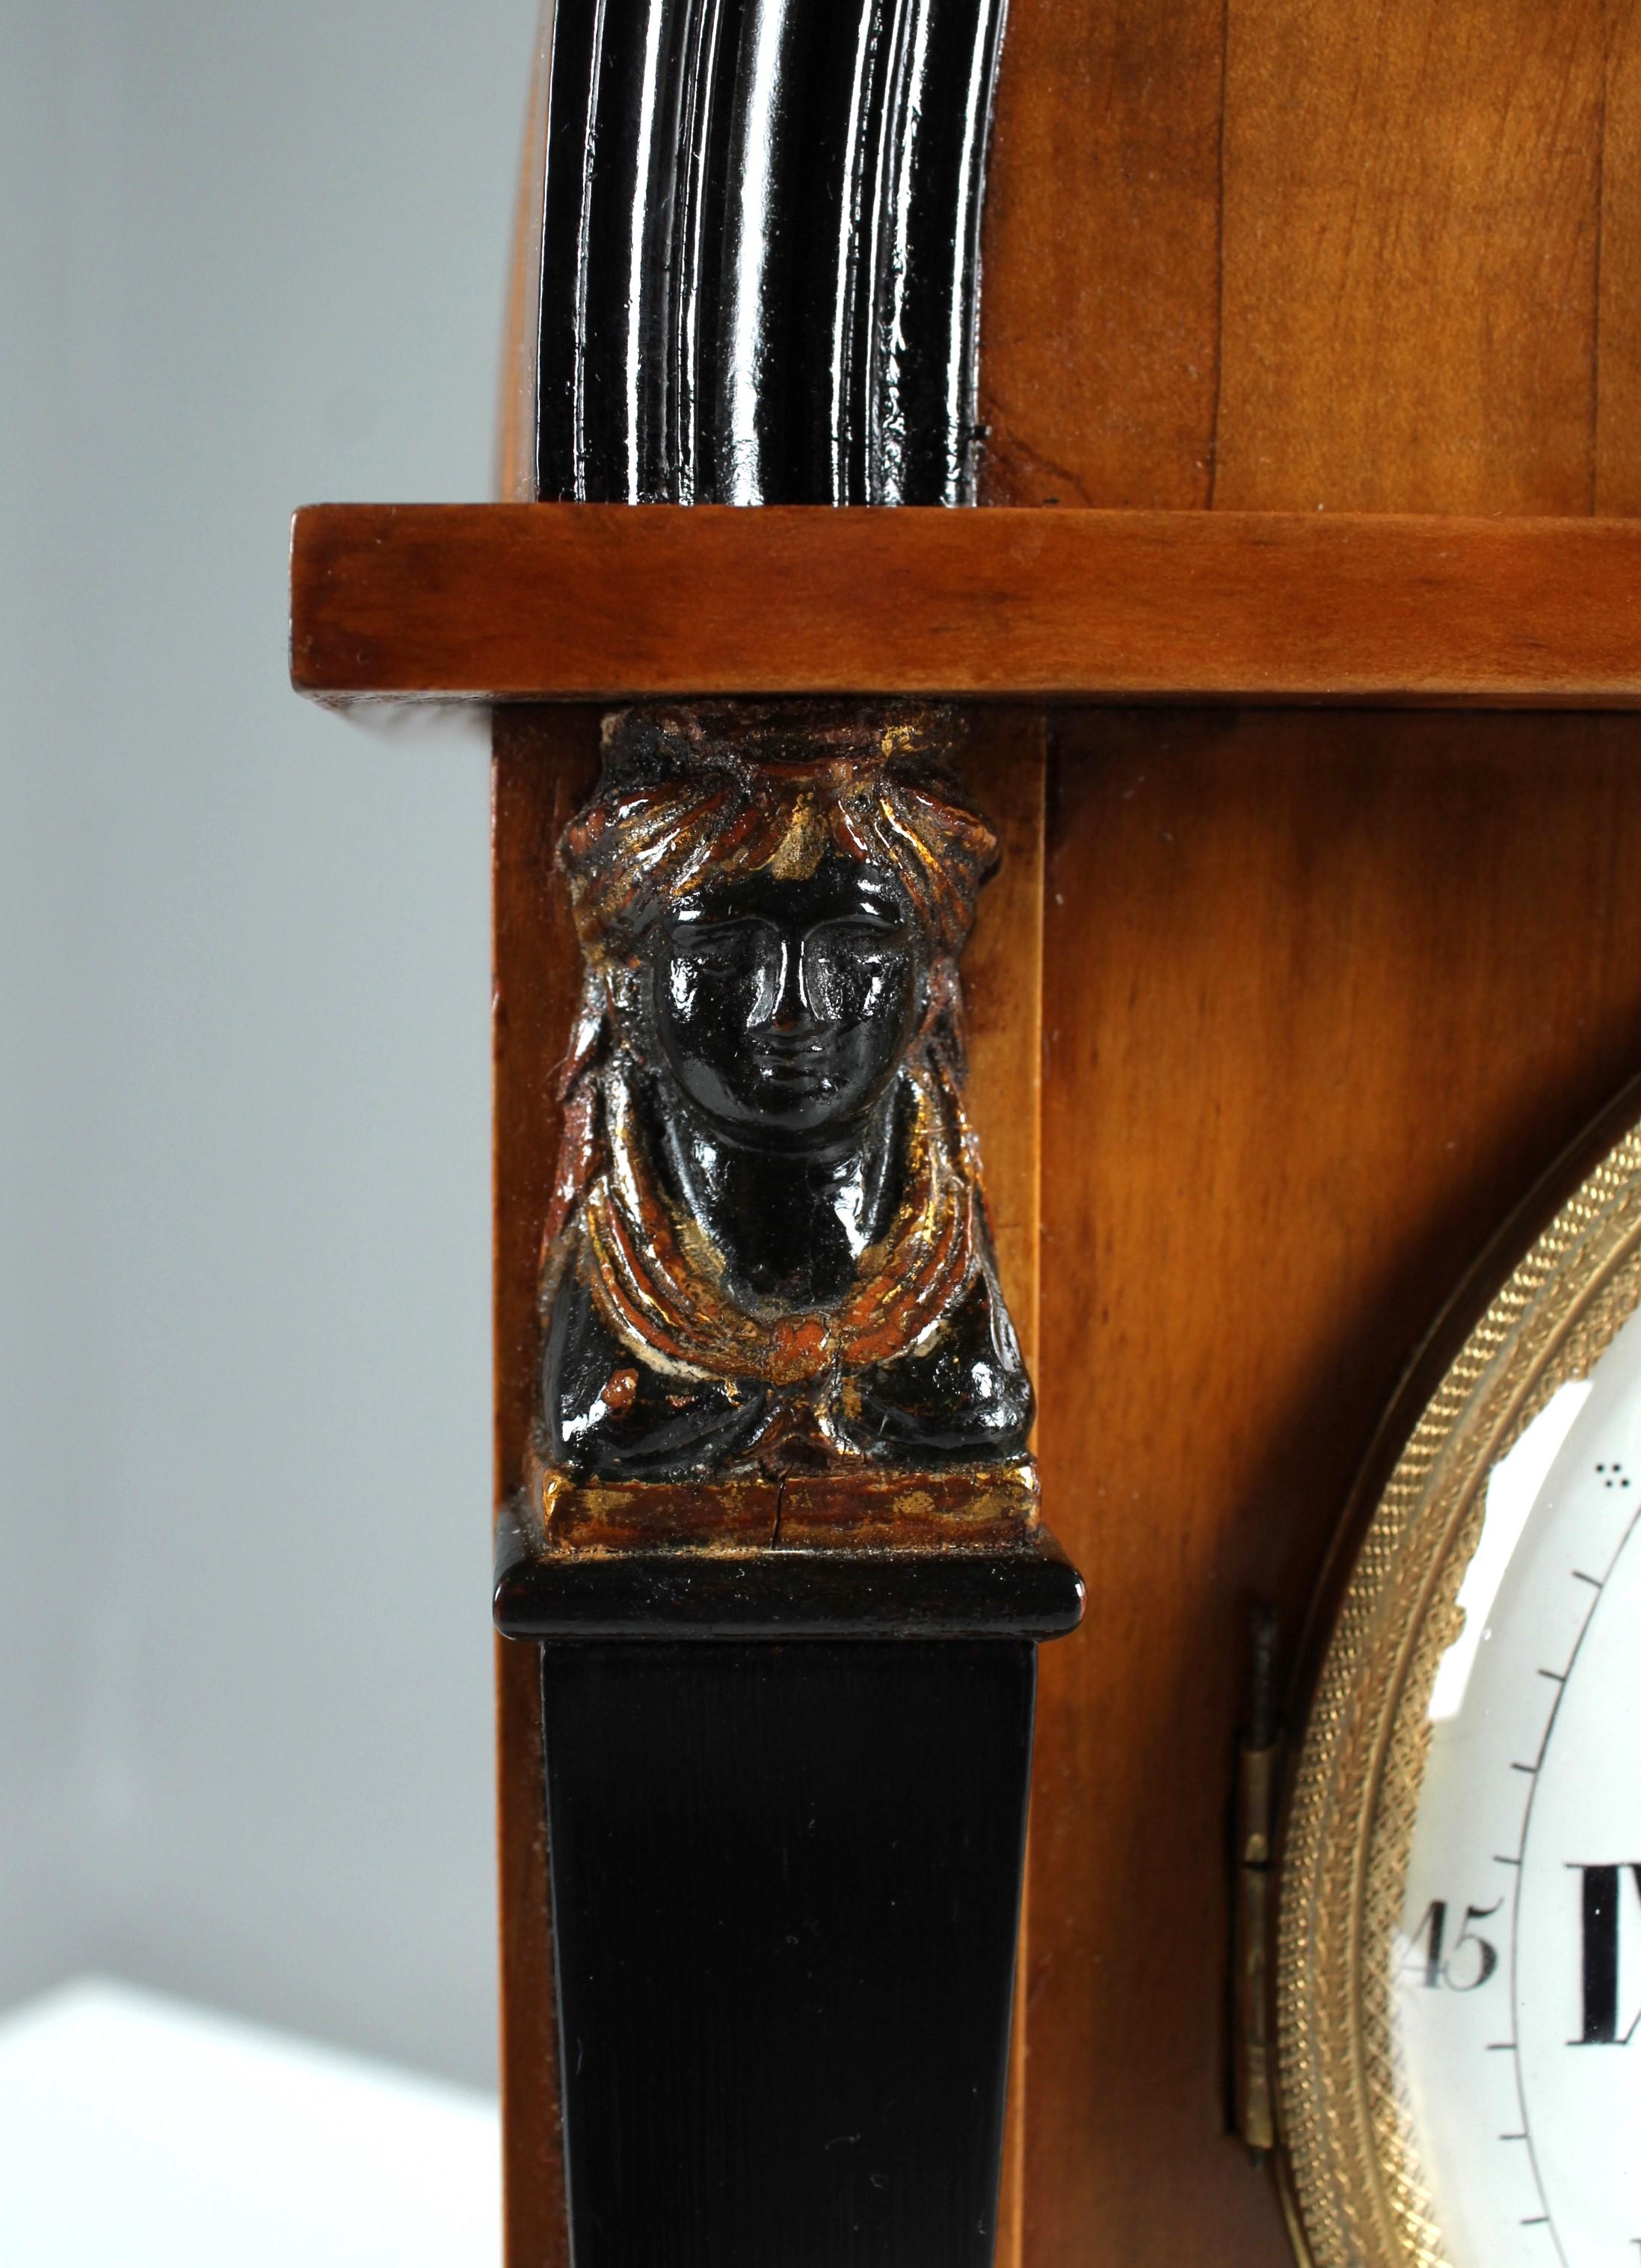 Early 19th Century 19th Century Biedermeier Mantel Clock with Automated Face, circa 1820-1830